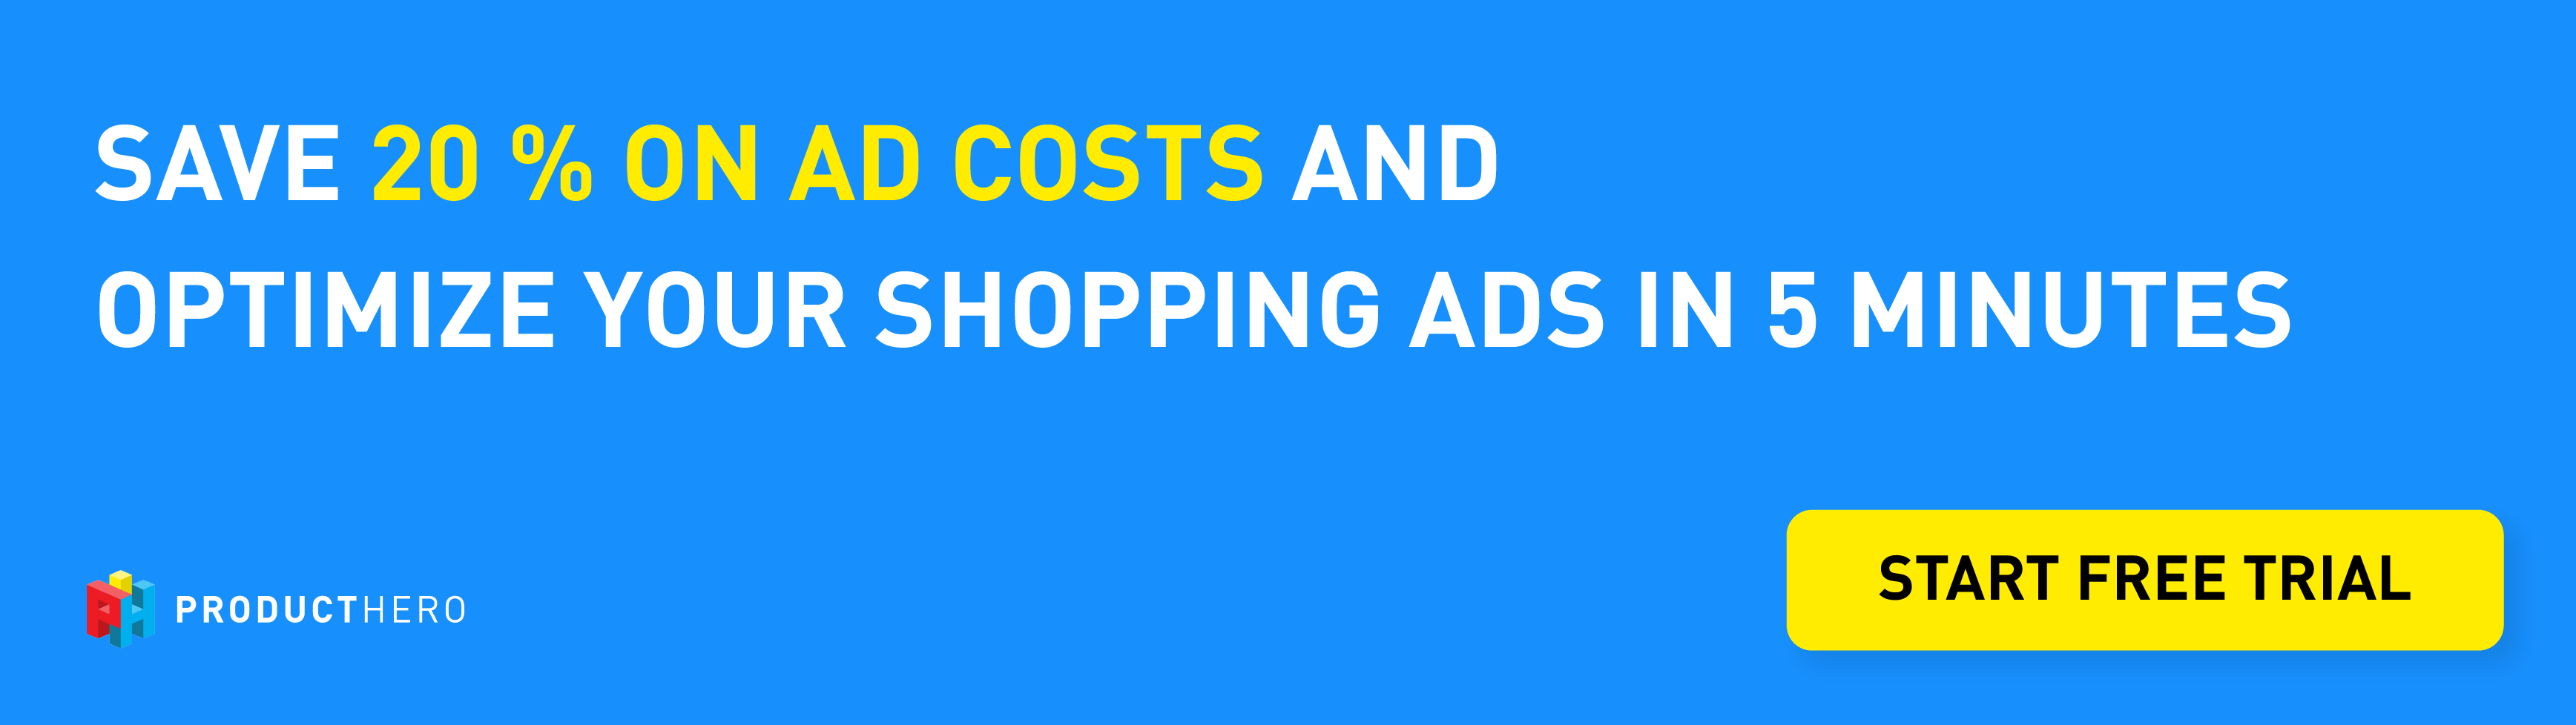 Save 20% on ad costs by switching to Producthero CSS